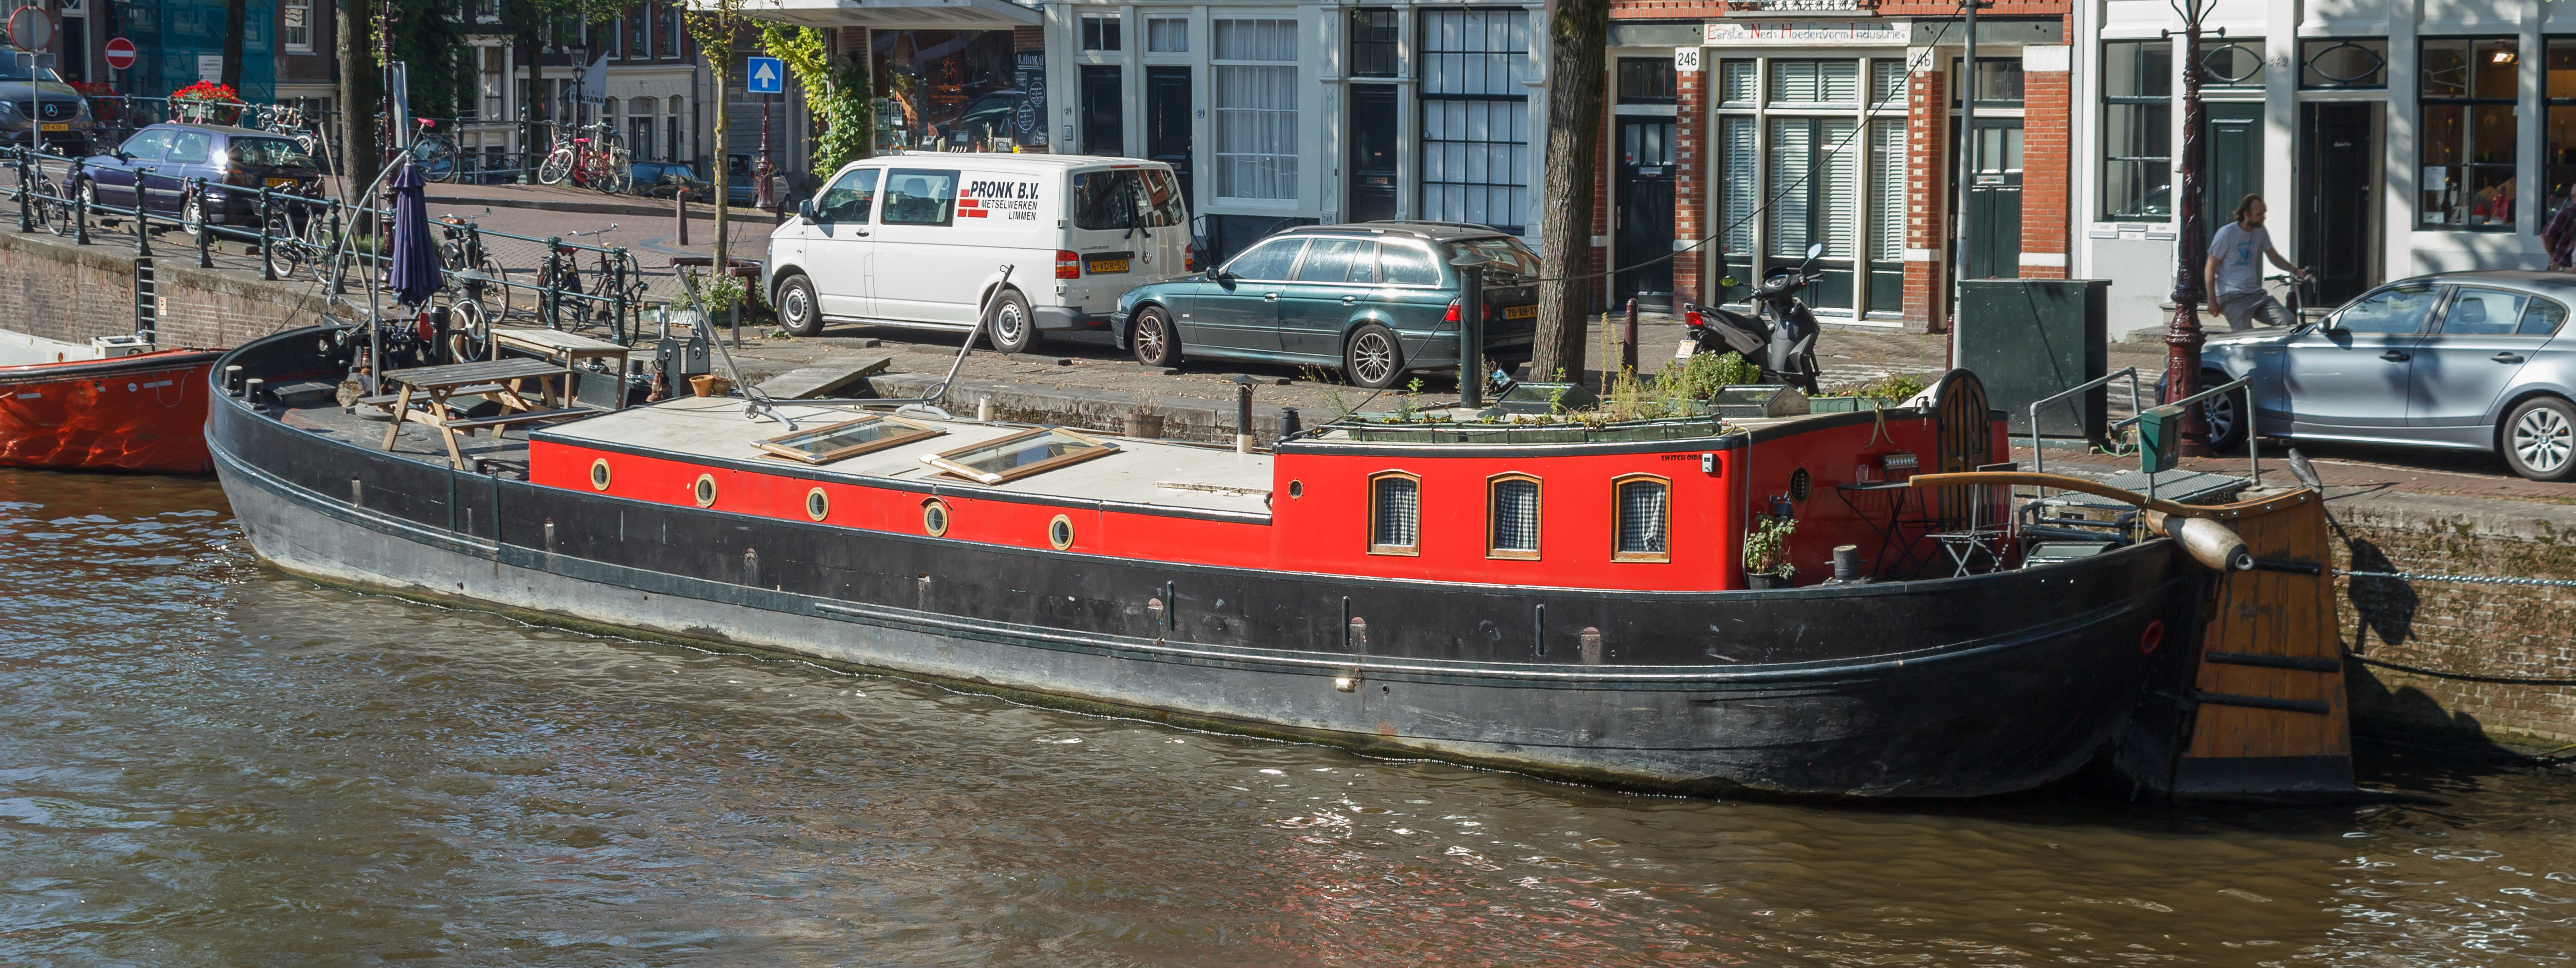 Houseboat at Prinsengracht 246 2016-09-13